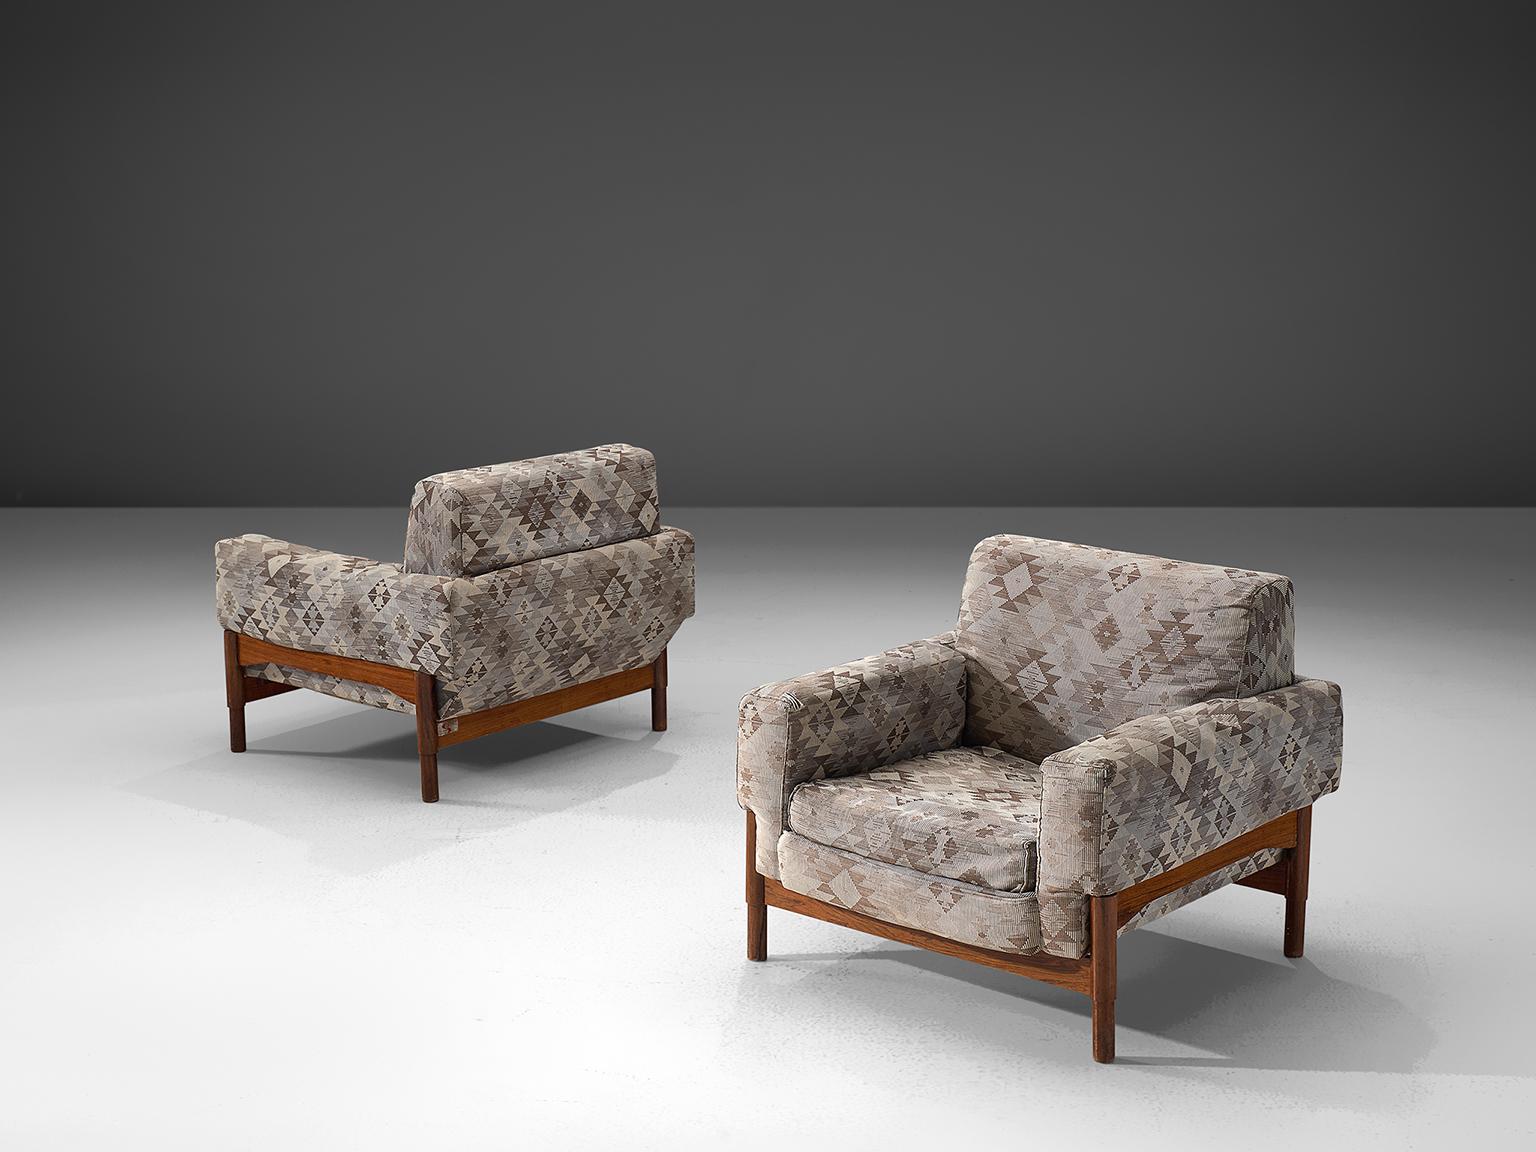 Saporiti, set of two lounge chairs in rosewood and fabric, Italy, 1960s.

These chairs are equipped with a rosewood frame and a retro sand to grey colored upholstery. These chairs are designed in a modest, yet distinguished look. The chairs